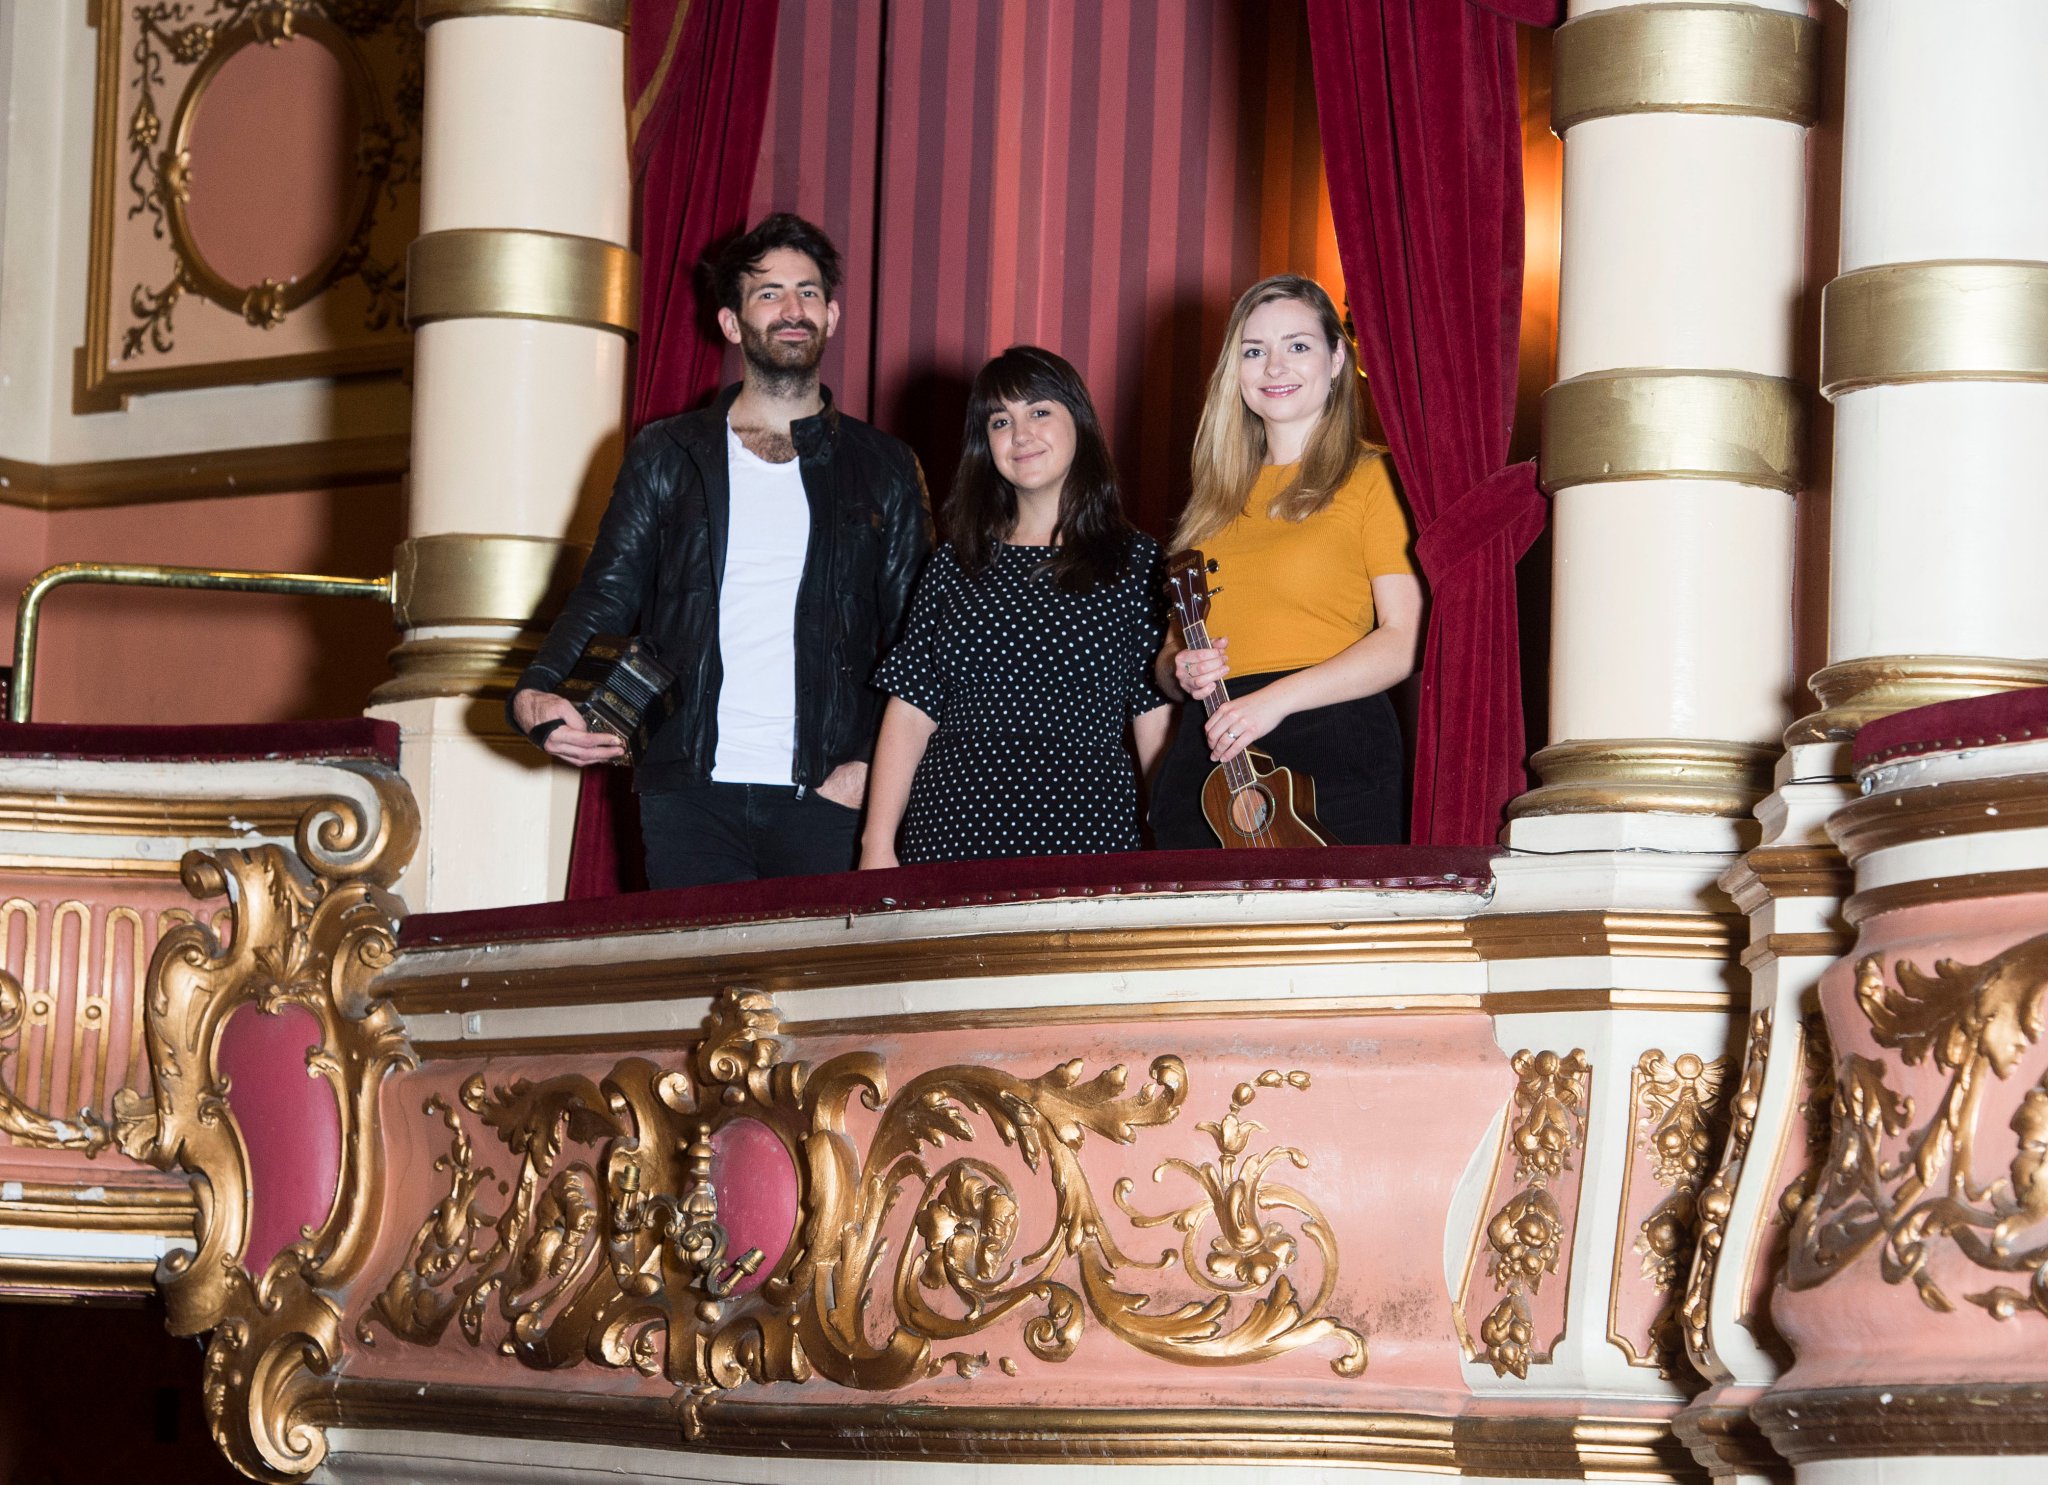 Promo image of artists in the King's Theatre Glasgow for Celtic Connections 2019